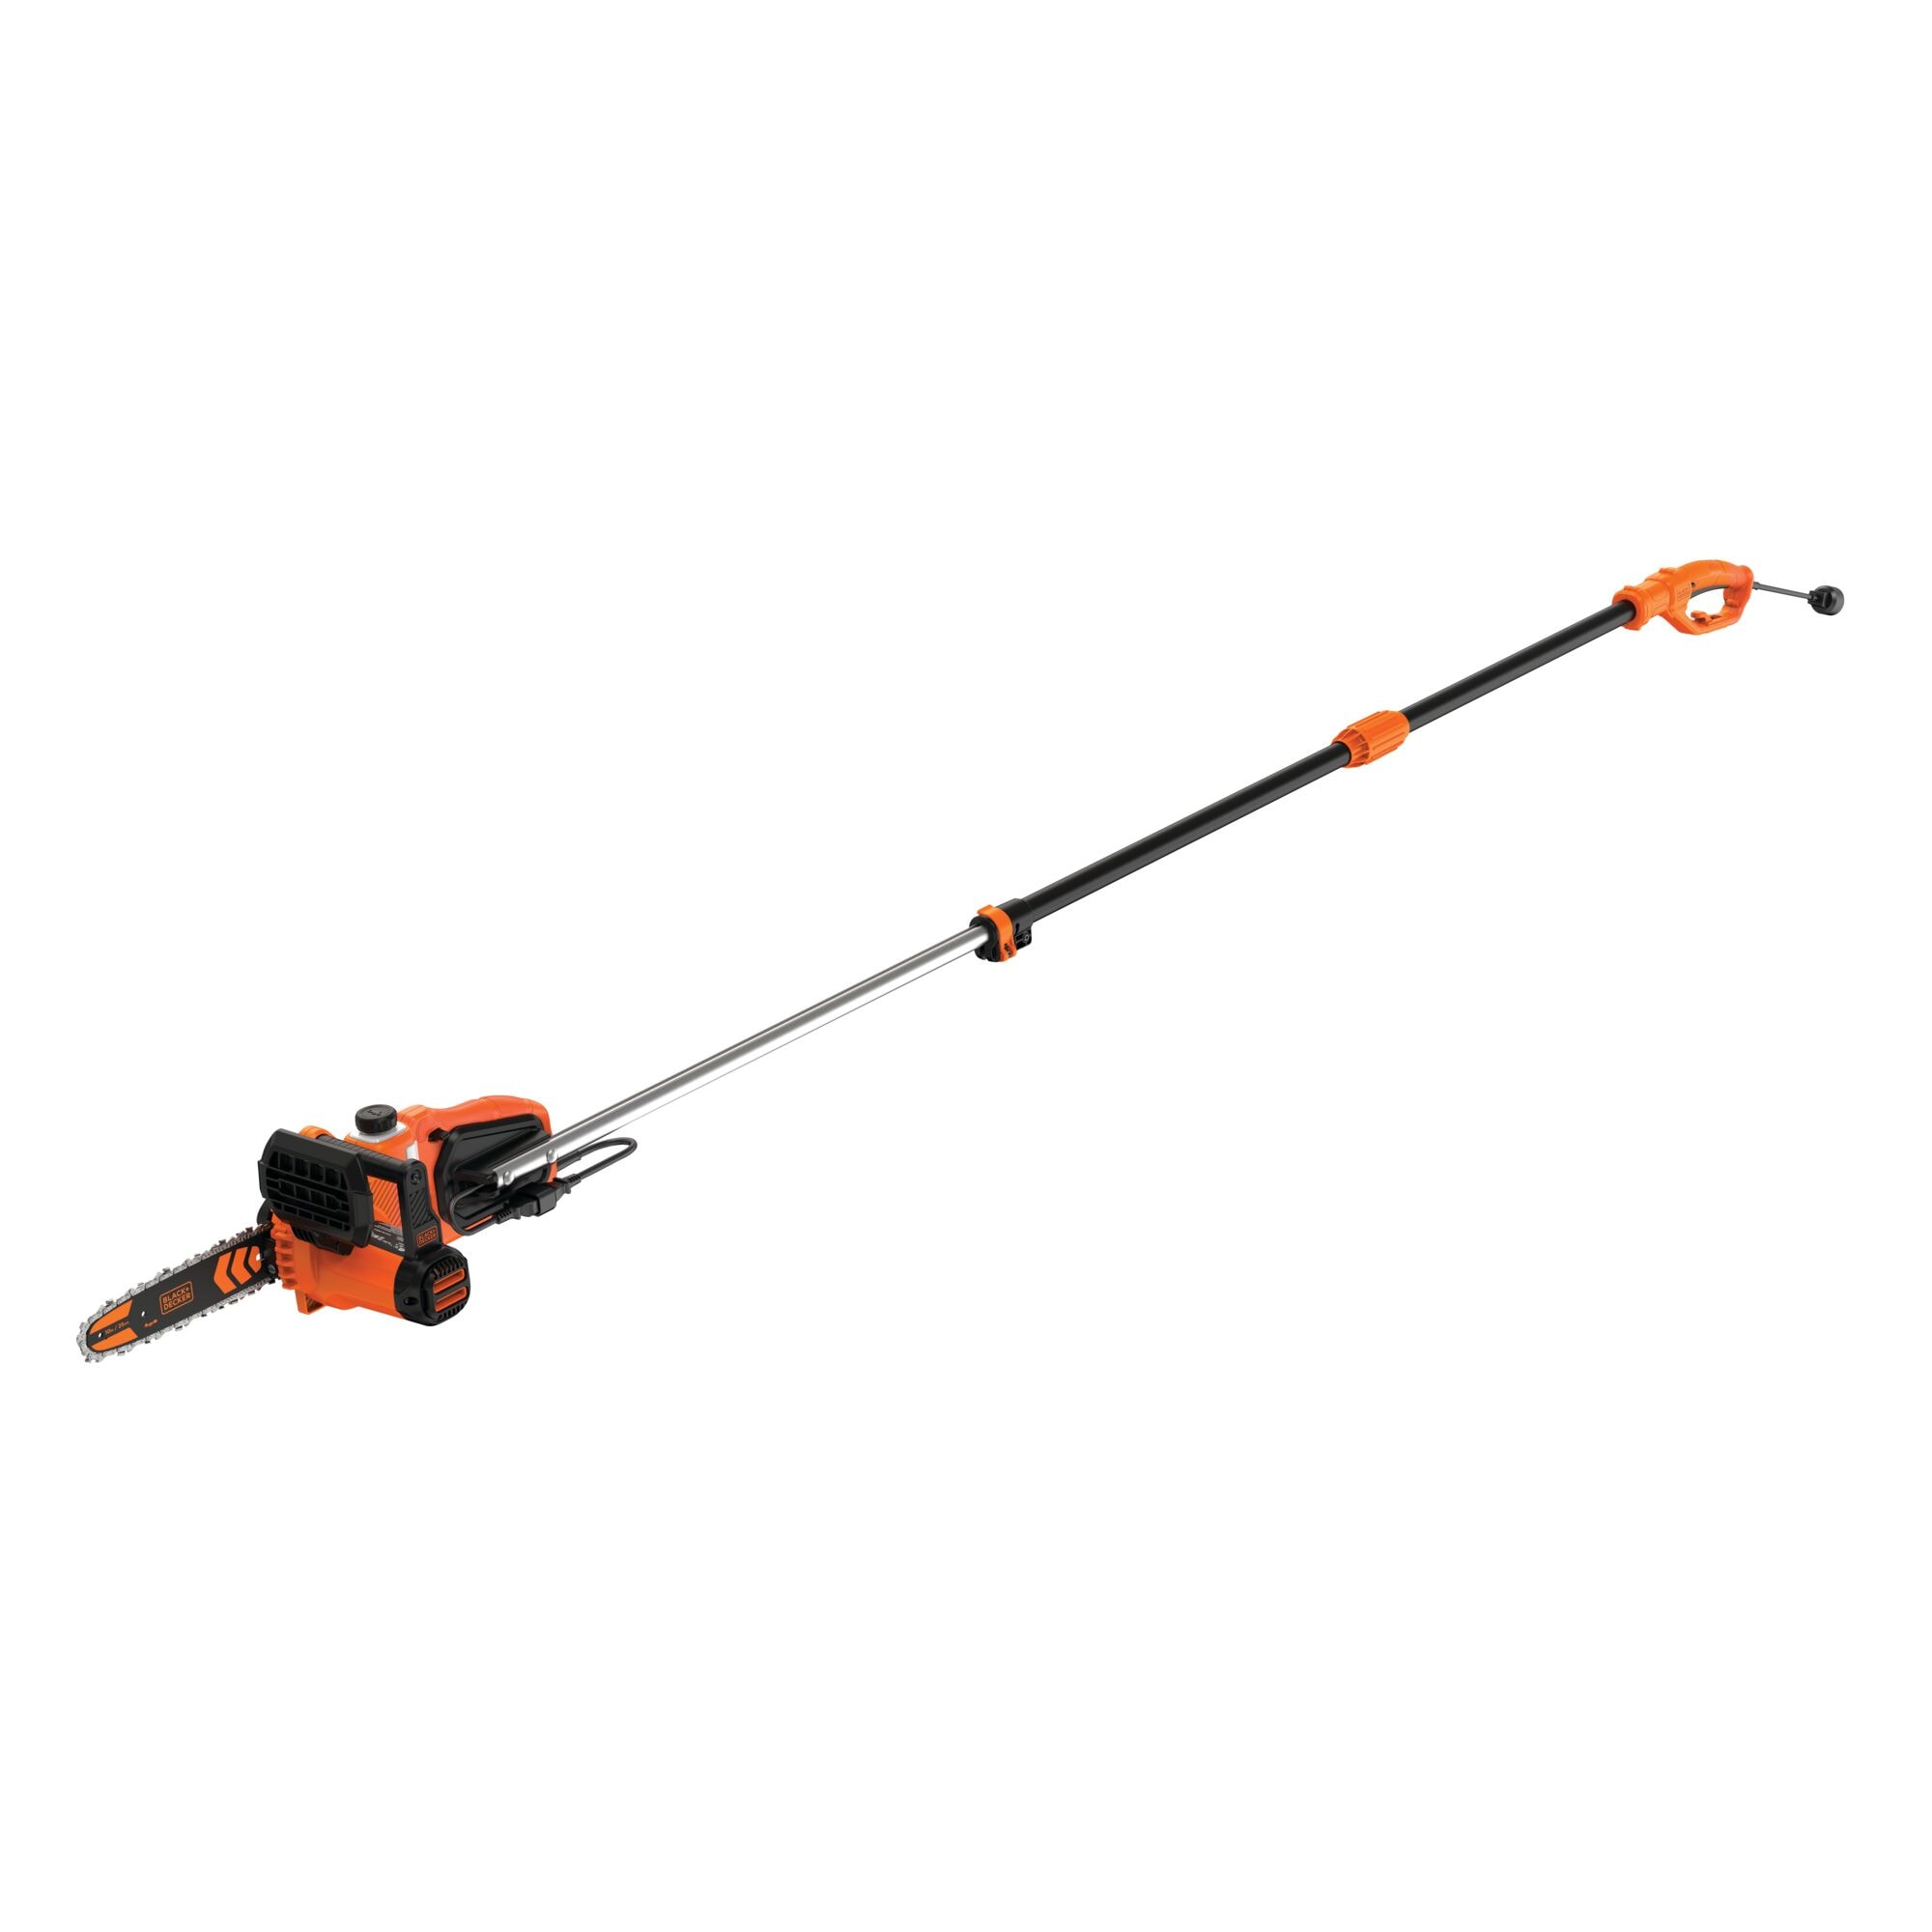 Have a question about BLACK+DECKER 7.5 in. 12 Amp Corded Electric